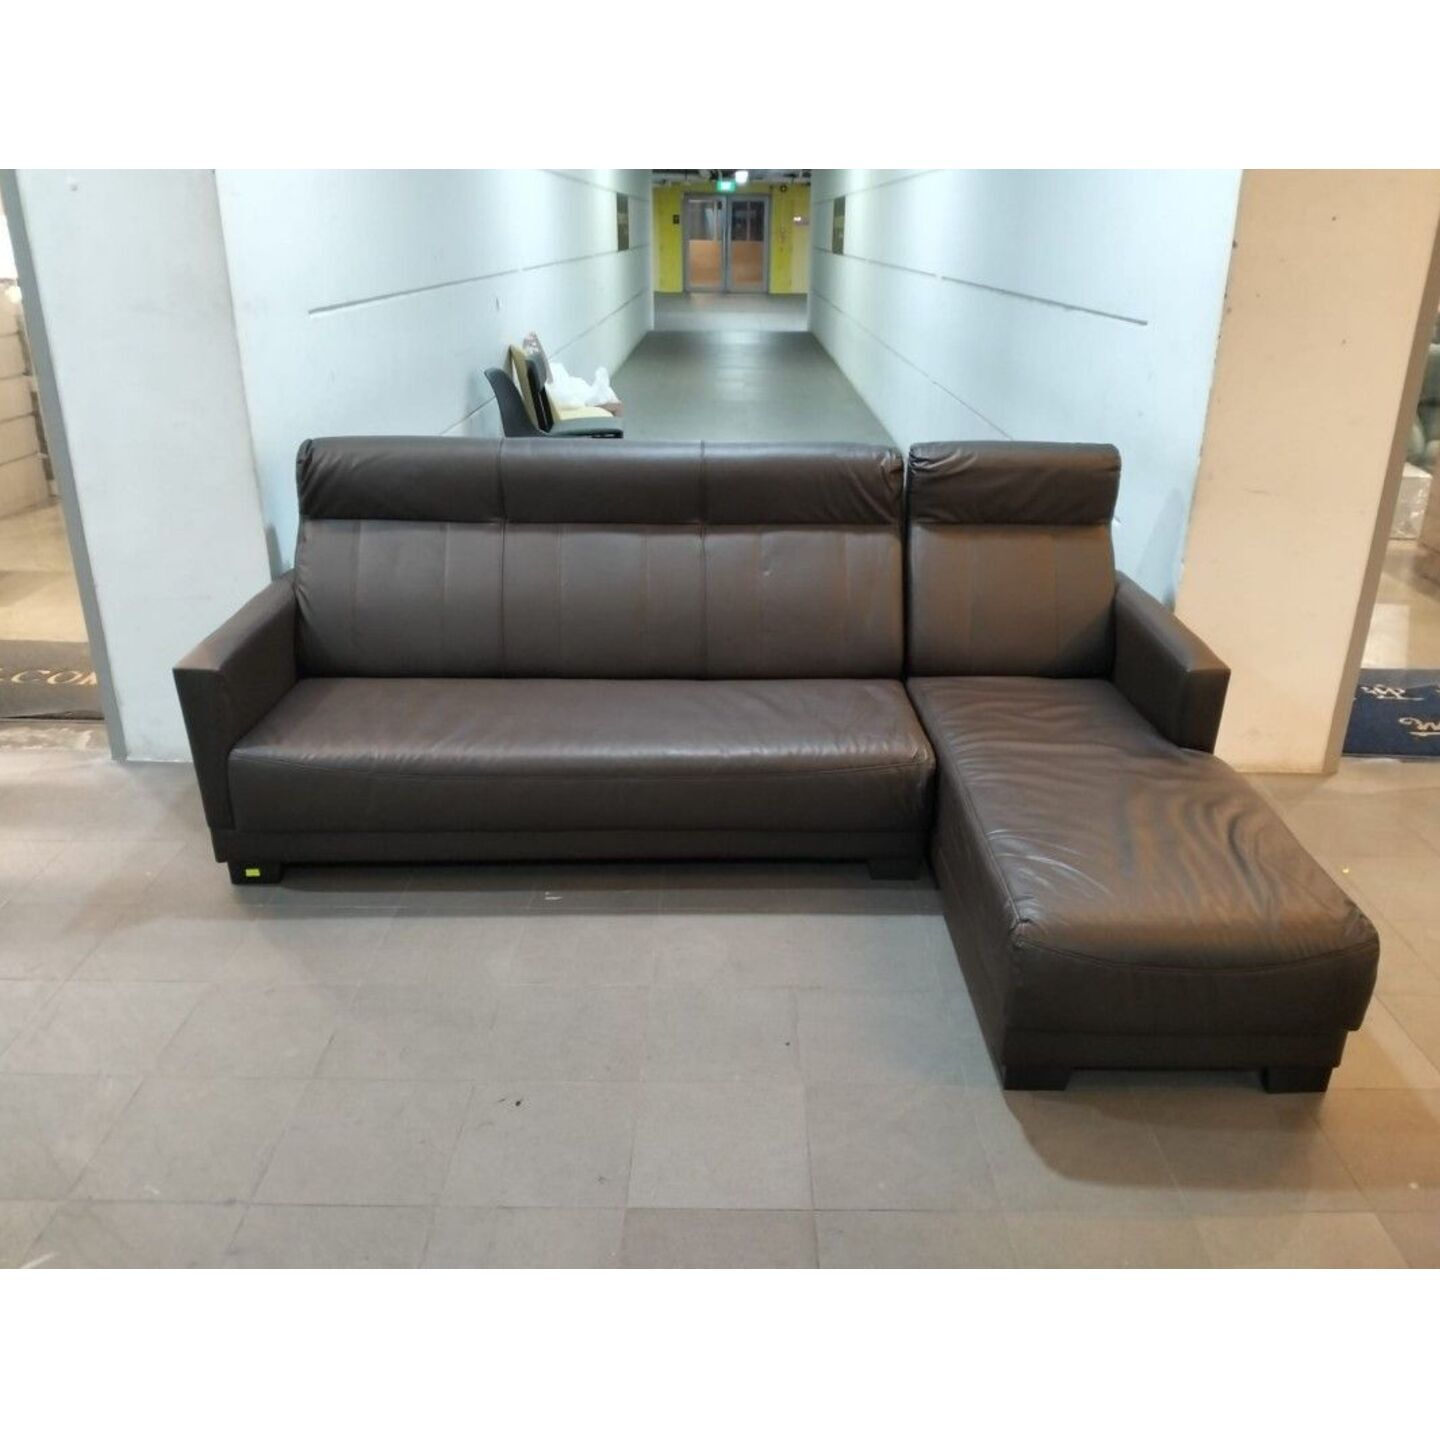 KEIBLER 4 Seater L-Shaped Sofa in DARK BROWN PU LEATHER